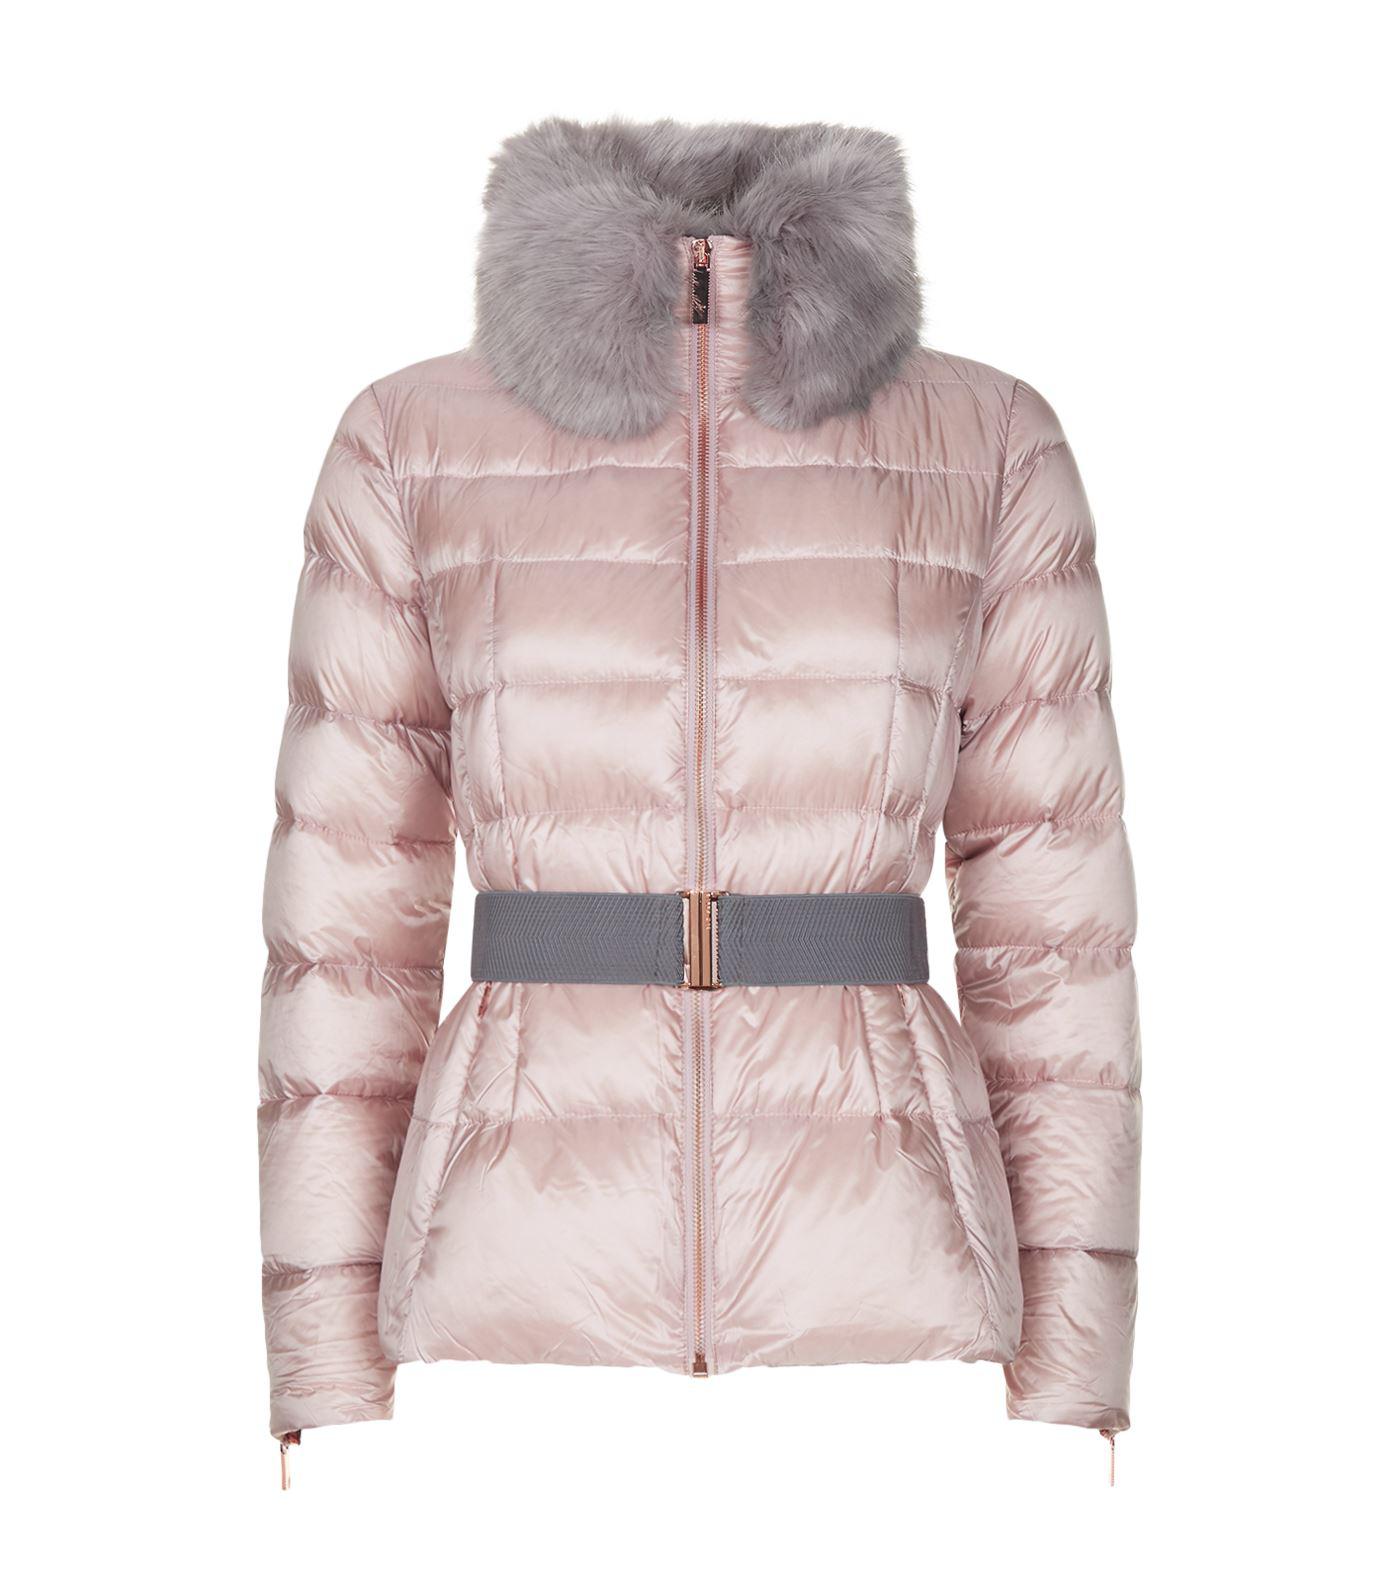 Ted Baker Junnie Puffer Jacket in Pink - Lyst